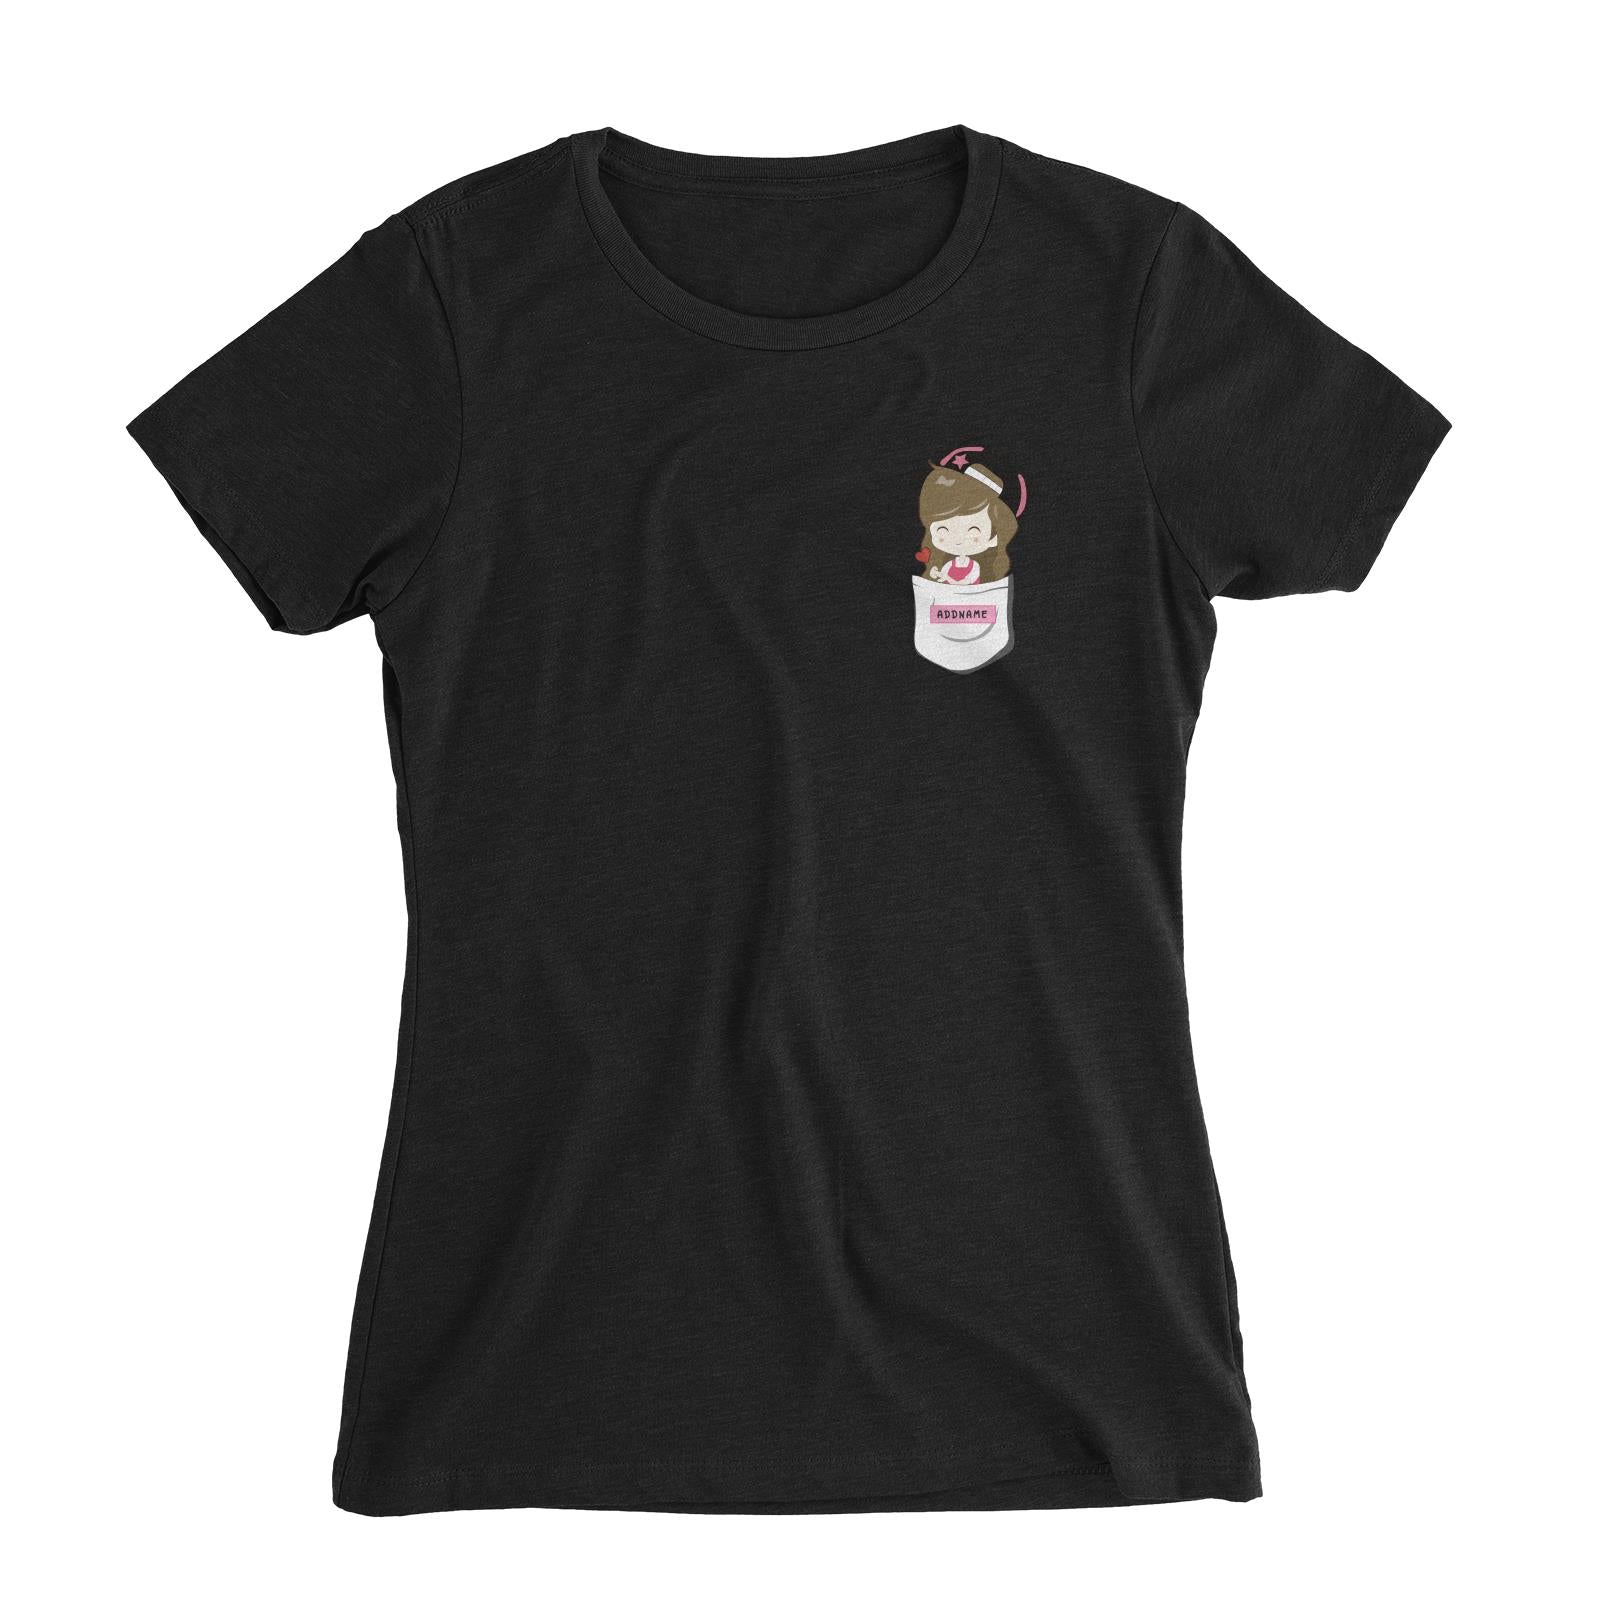 My Lovely Family Series Pocket Size Mommy Addname Women Slim Fit T-Shirt